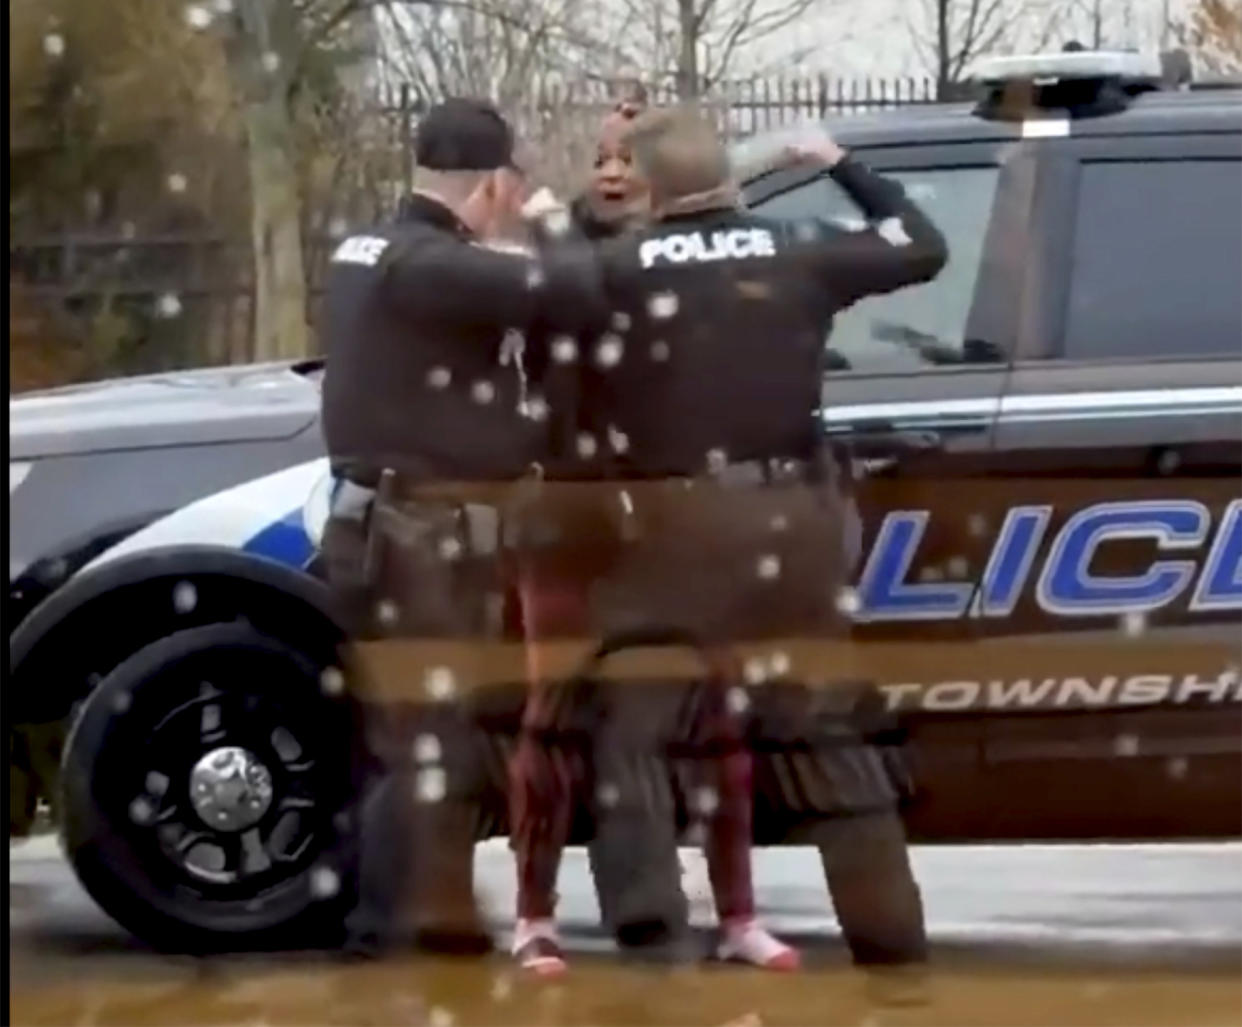 This screen grab made from video shows Butler Township officers Sgt. Tim Zellers, left, and Todd Stanley, right, restrain and arrest Latinka Hancock outside a McDonald's restaurant in Butler Township, Ohio, on Monday, Jan. 16, 2023. The officers said Hancock resisted arrest, and video shows Stanley strike Hancock. (Mario Robinson/ LOCAL NEWS X /TMX via AP)